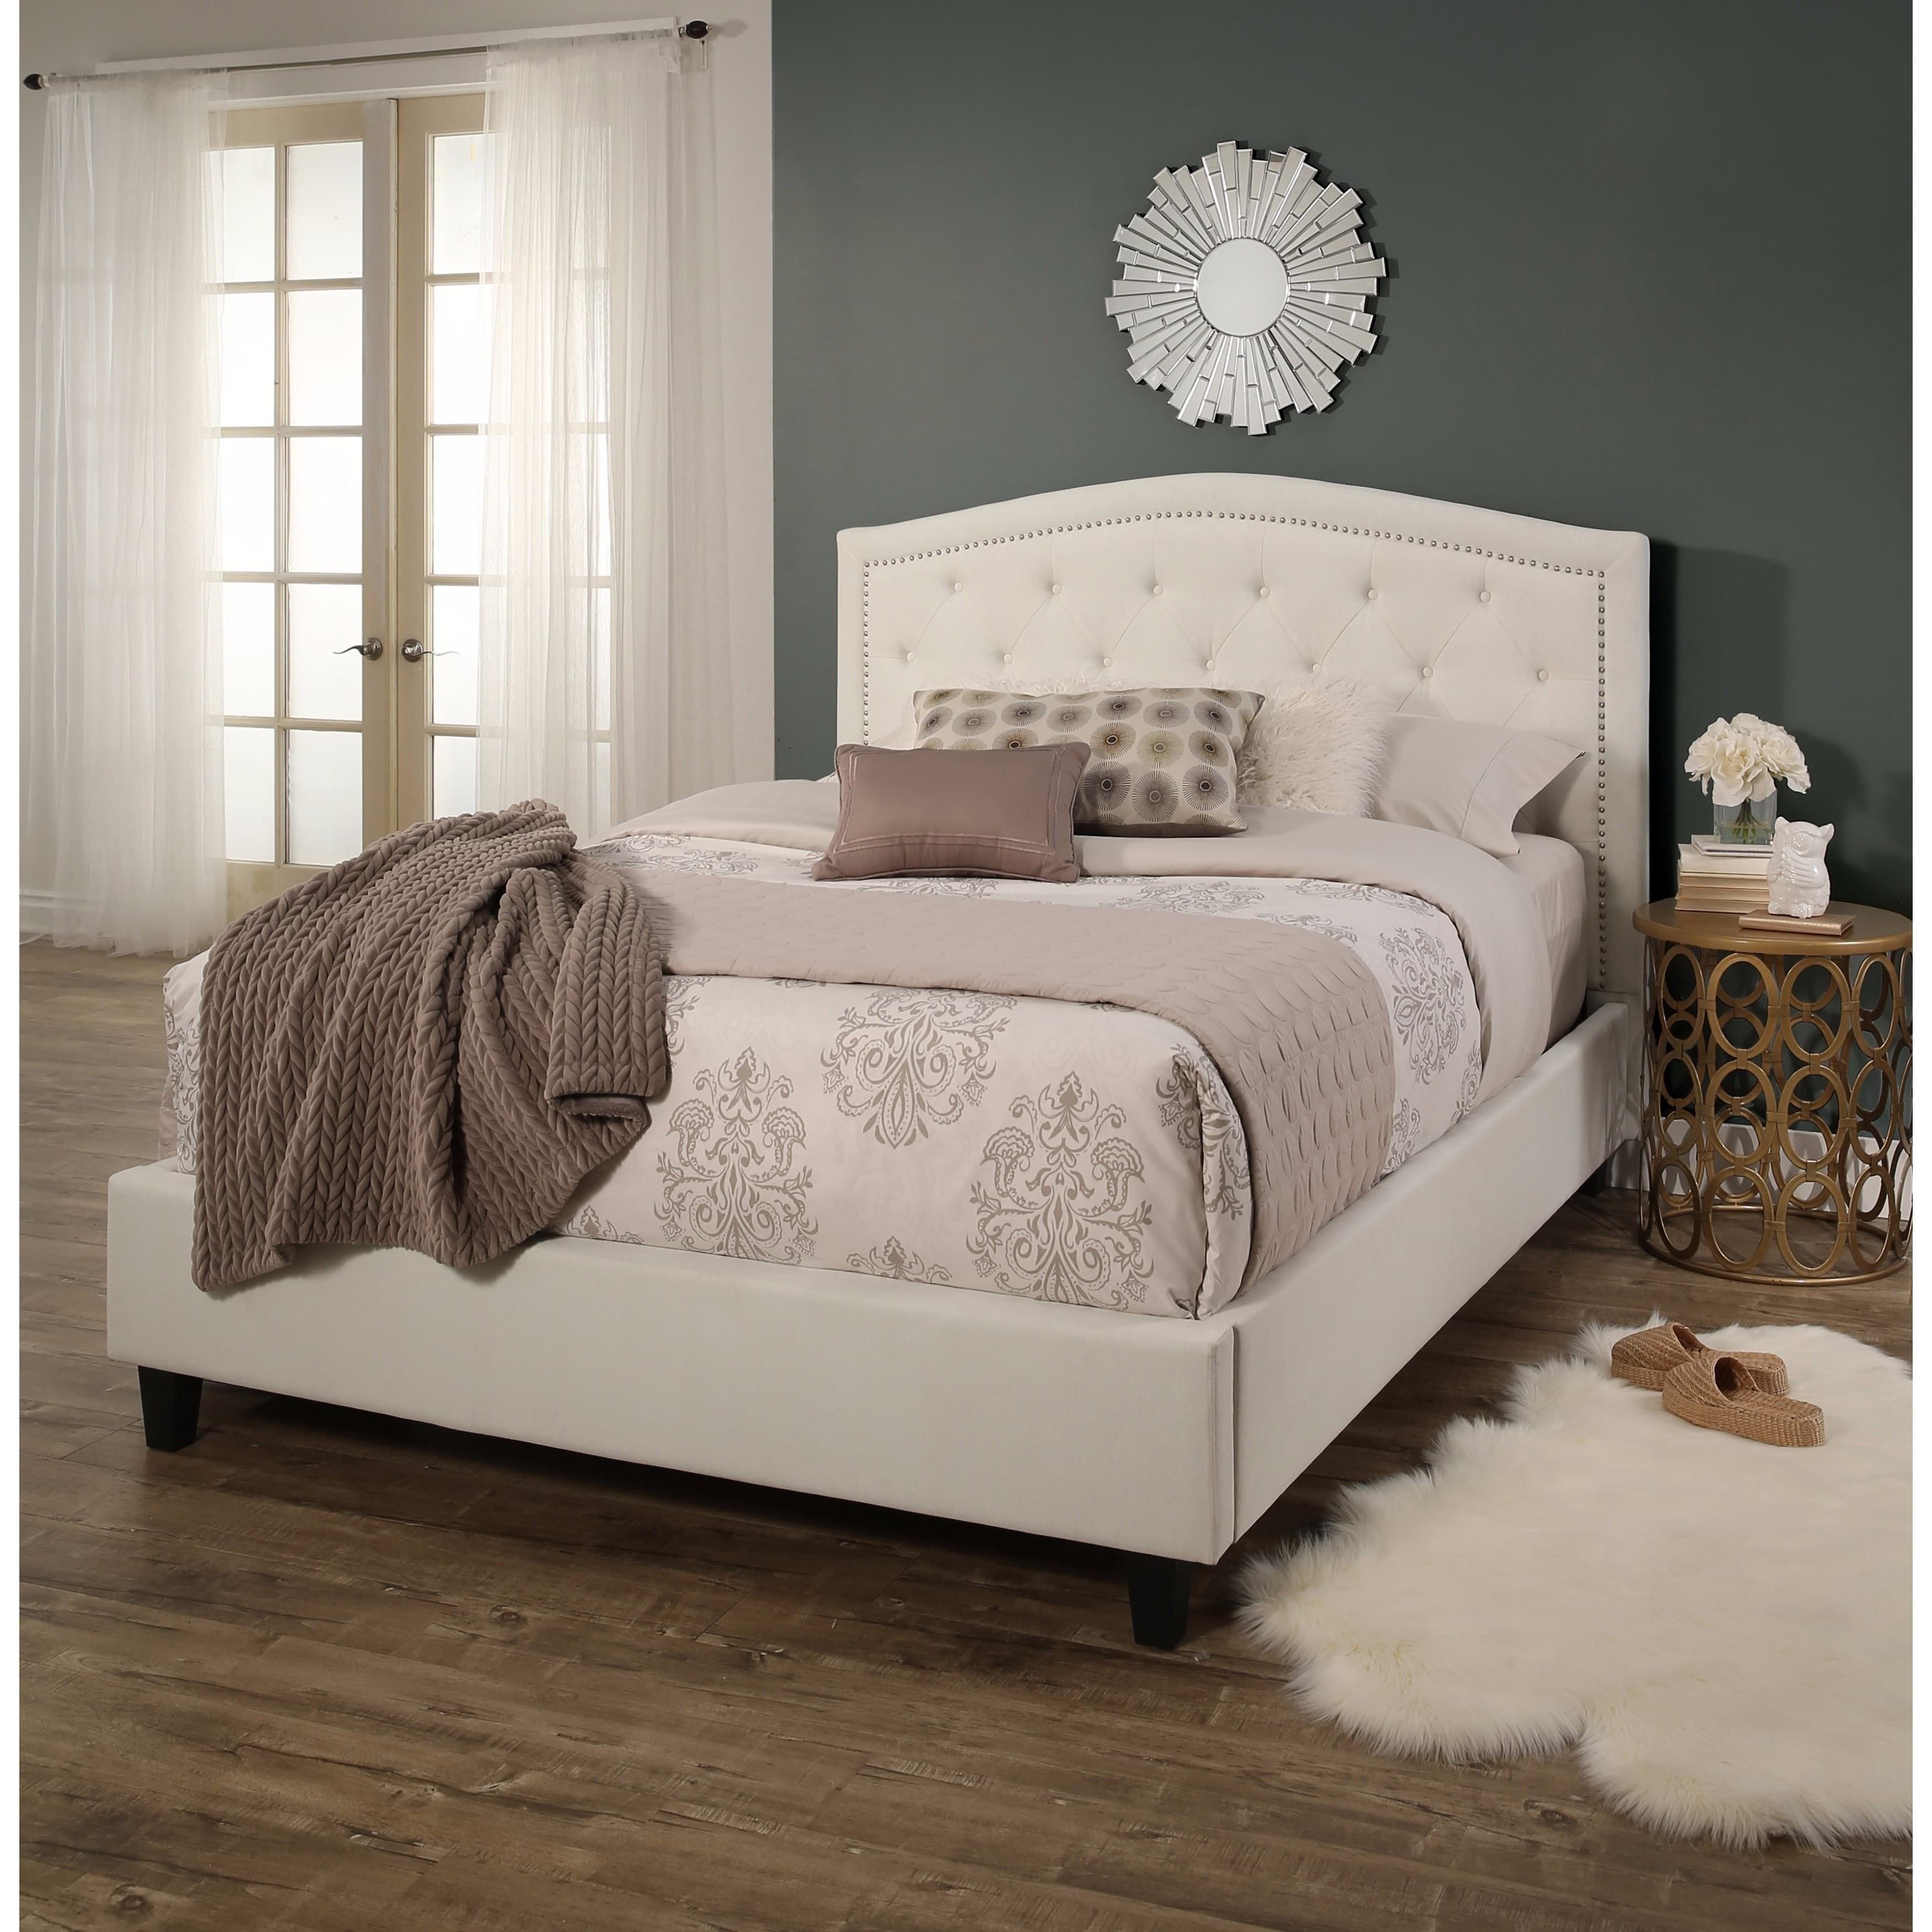 Bedroom Furniture for Sale Awesome Virgil Upholstered Tufted Queen Bed by Christopher Knight